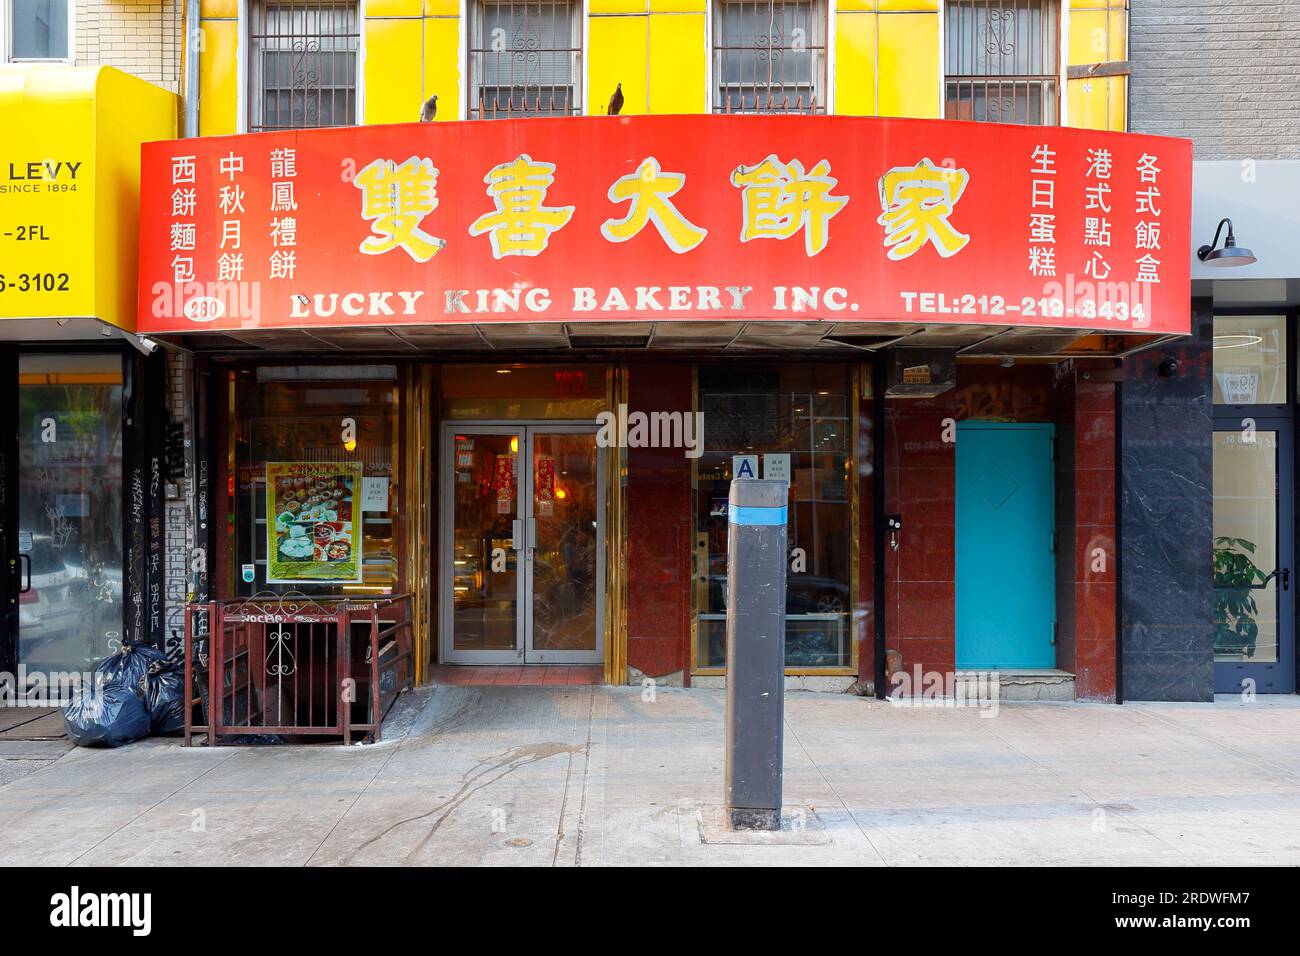 Lucky King Bakery 雙喜大餅家, 280 Grand St, New York, NYC storefront photo of a Chinese bakery in Manhattan Chinatown. Stock Photo